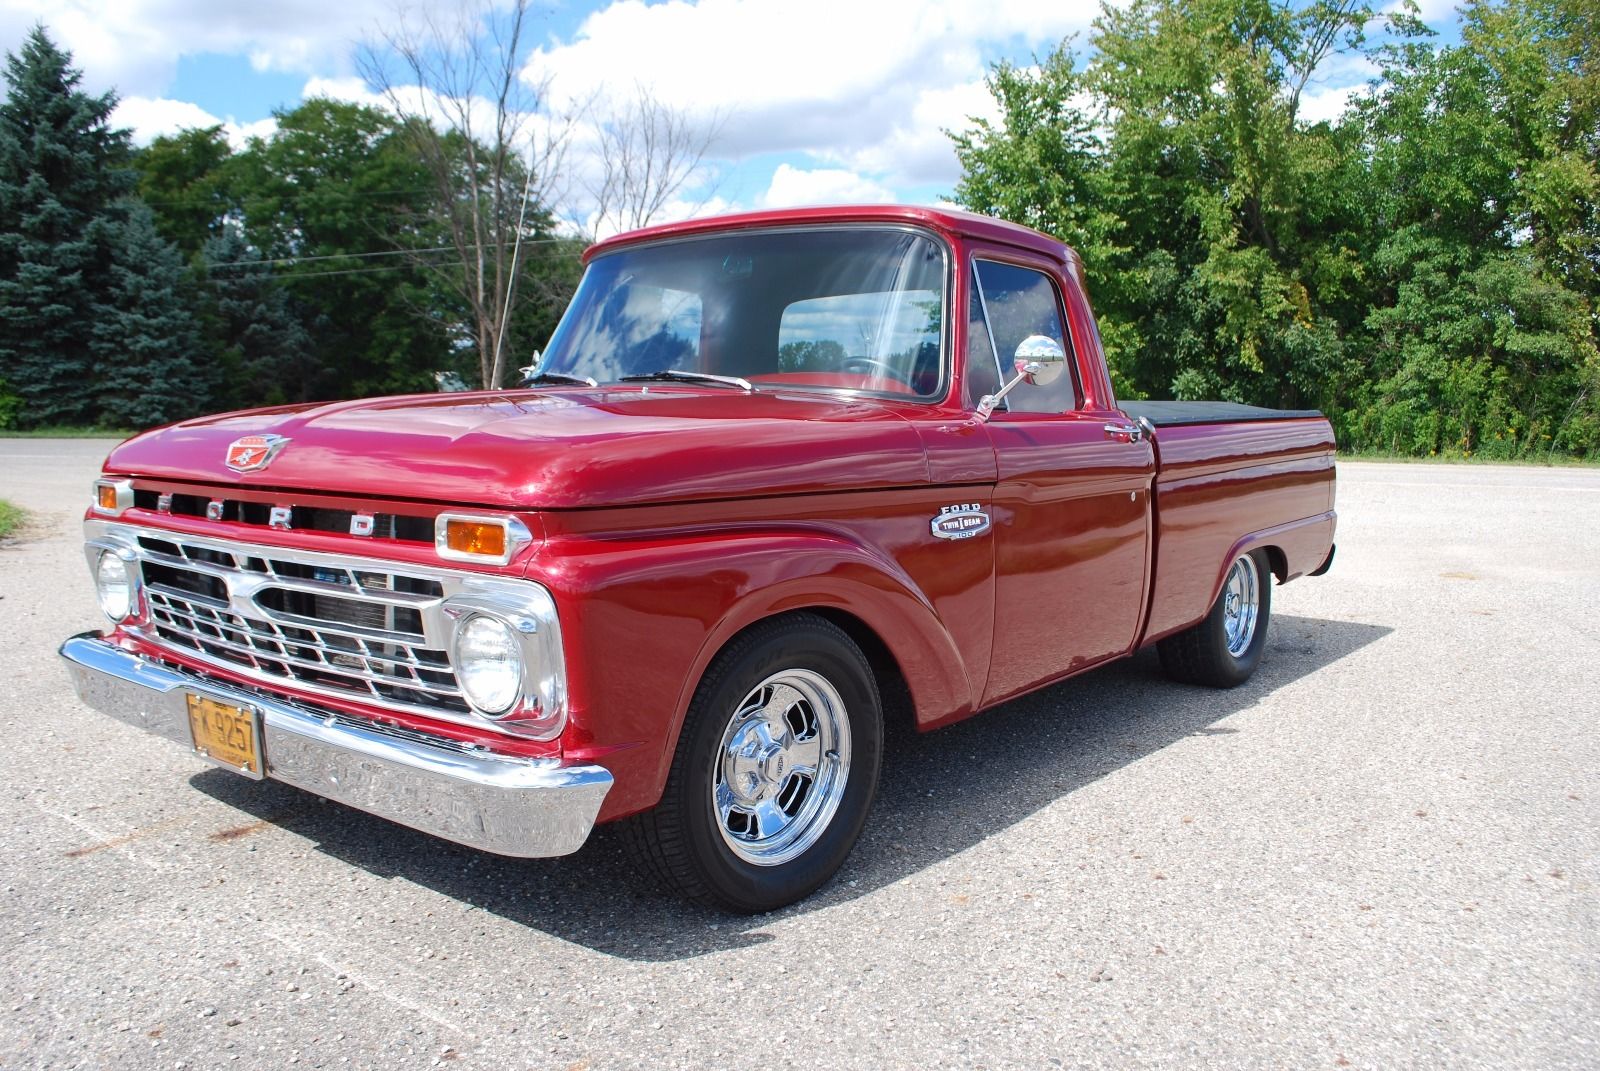 This 1966 Ford F-100 is a Clean Cherry Red Cruiser - Ford-Trucks.com